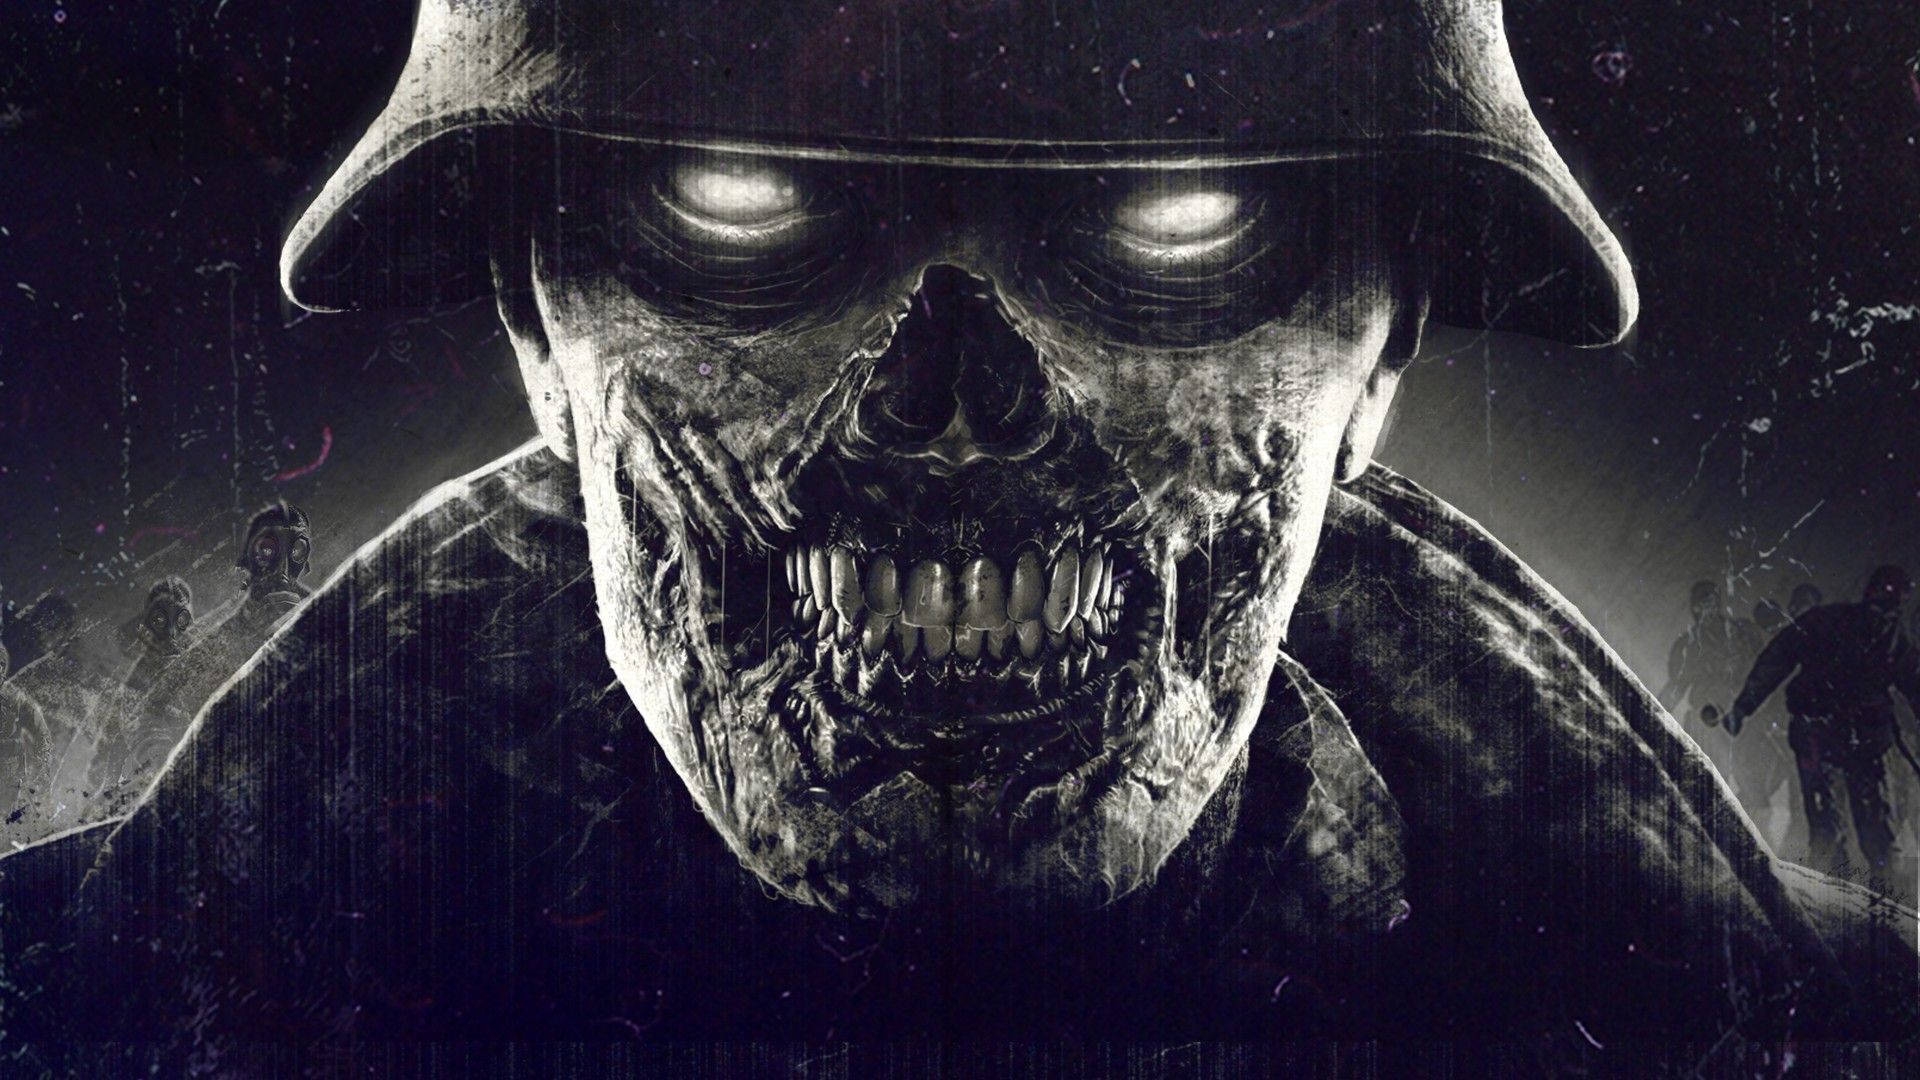 PS4 Zombie Army Trilogy black and white wallpaper.